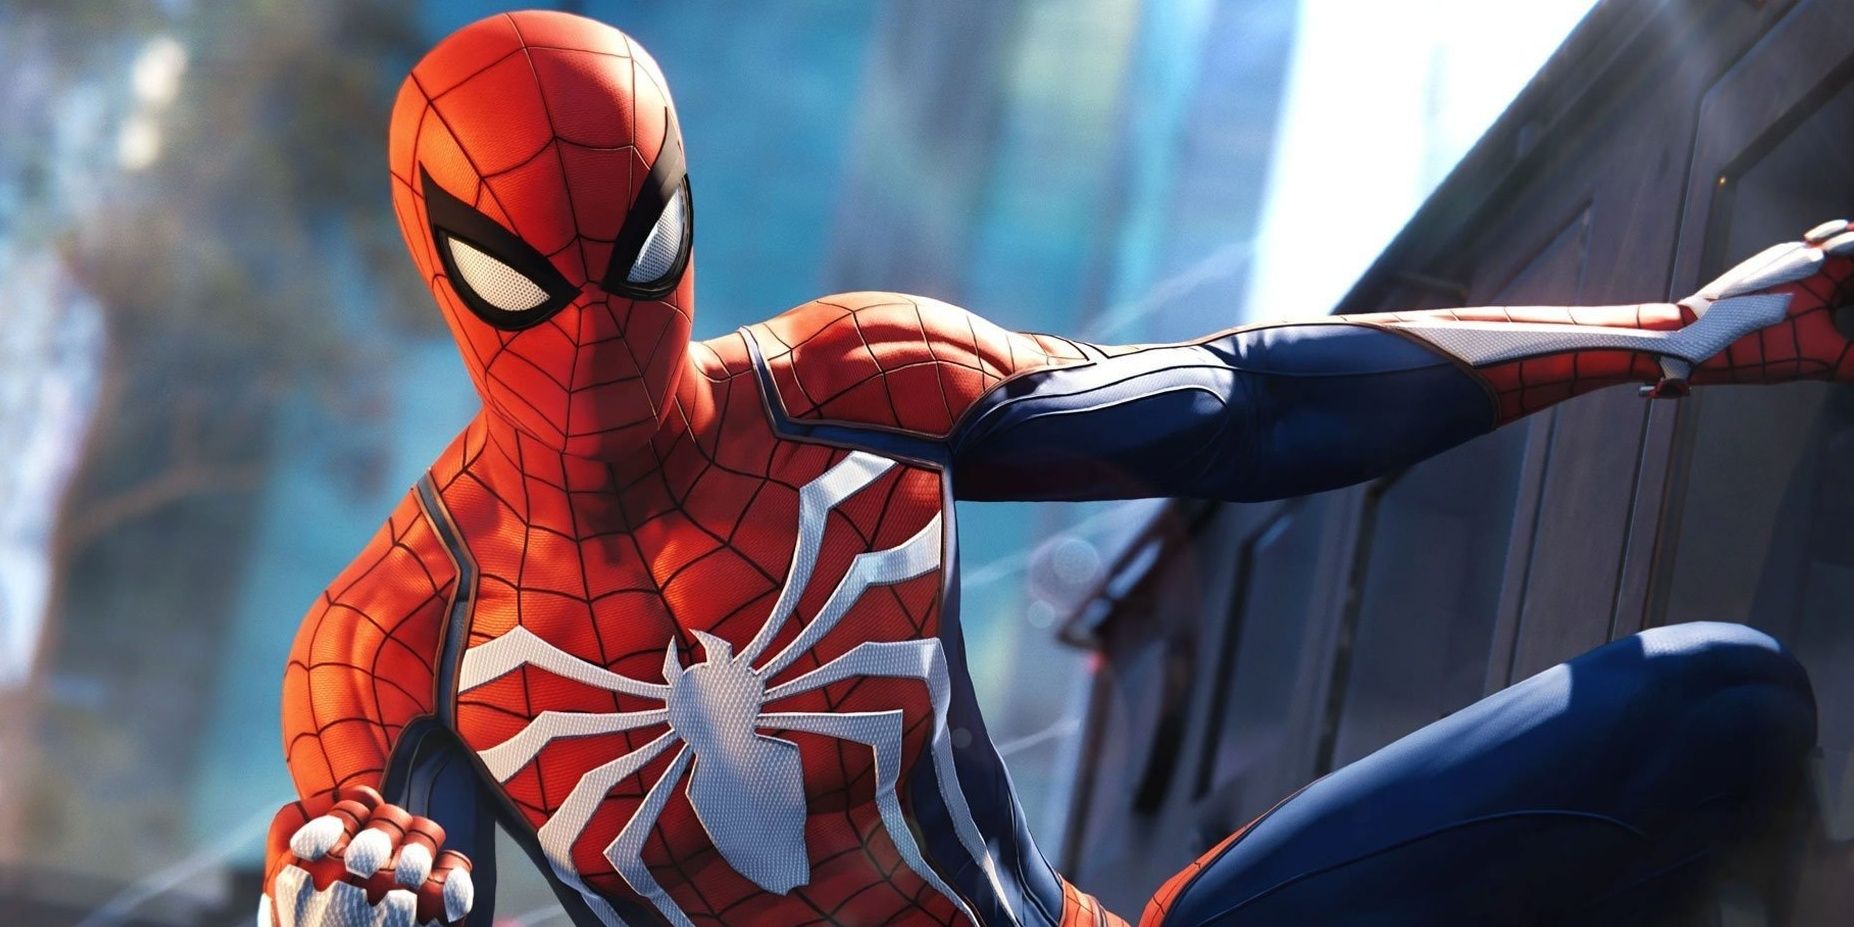 Spiderman fighitn in a firefight in Marvel's Spiderman For Playstation